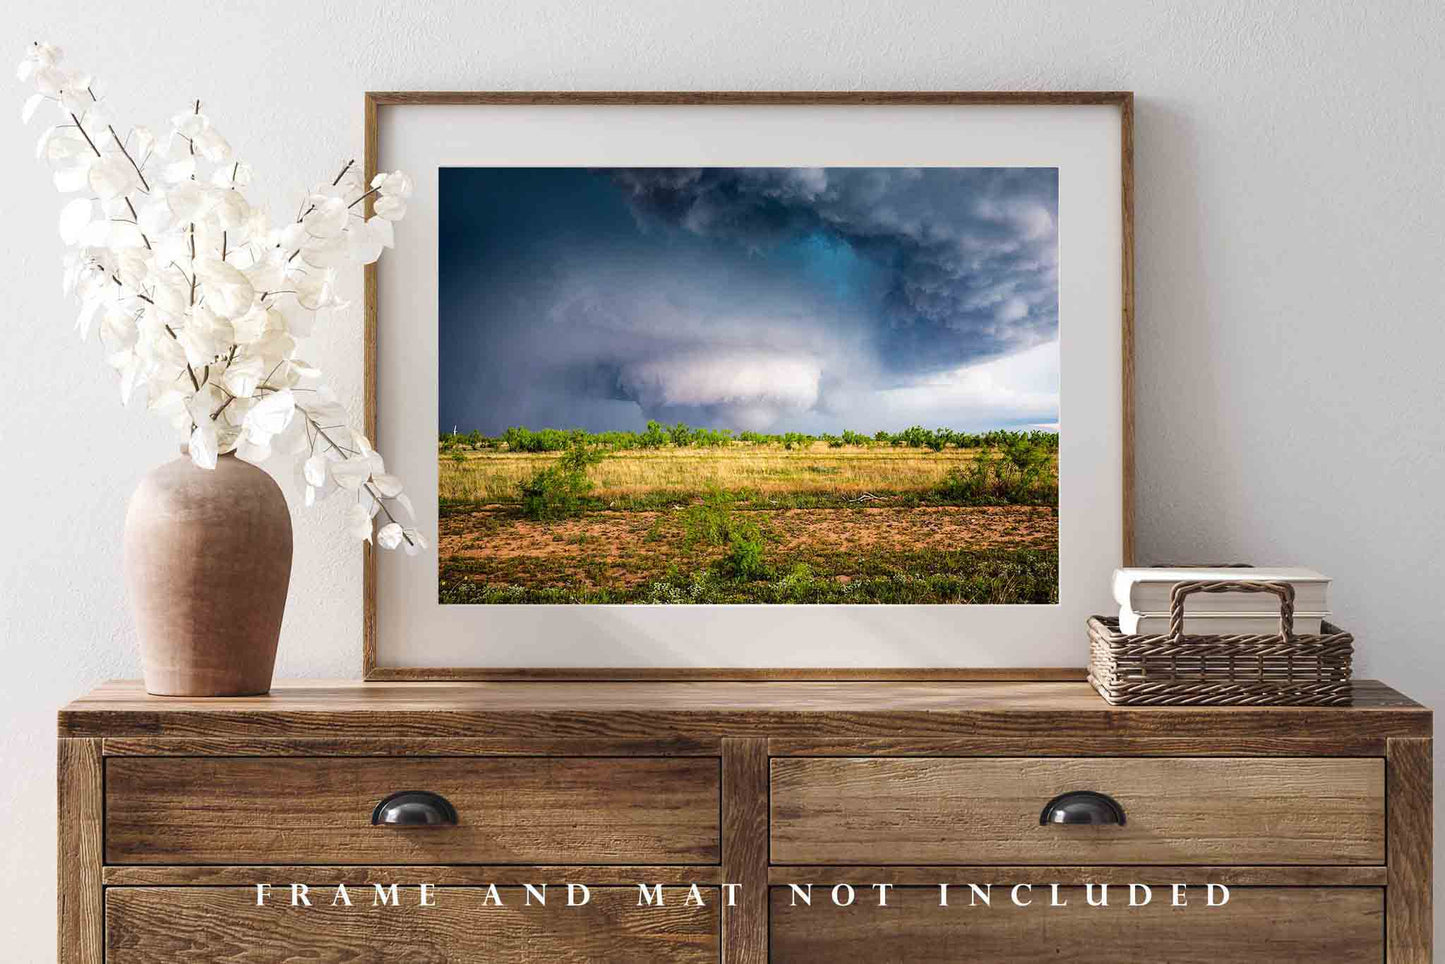 Storm Photography Print - Picture of Tornado on Spring Day in West Texas - Extreme Weather Wall Art Nature Cloud Photo Artwork Decor